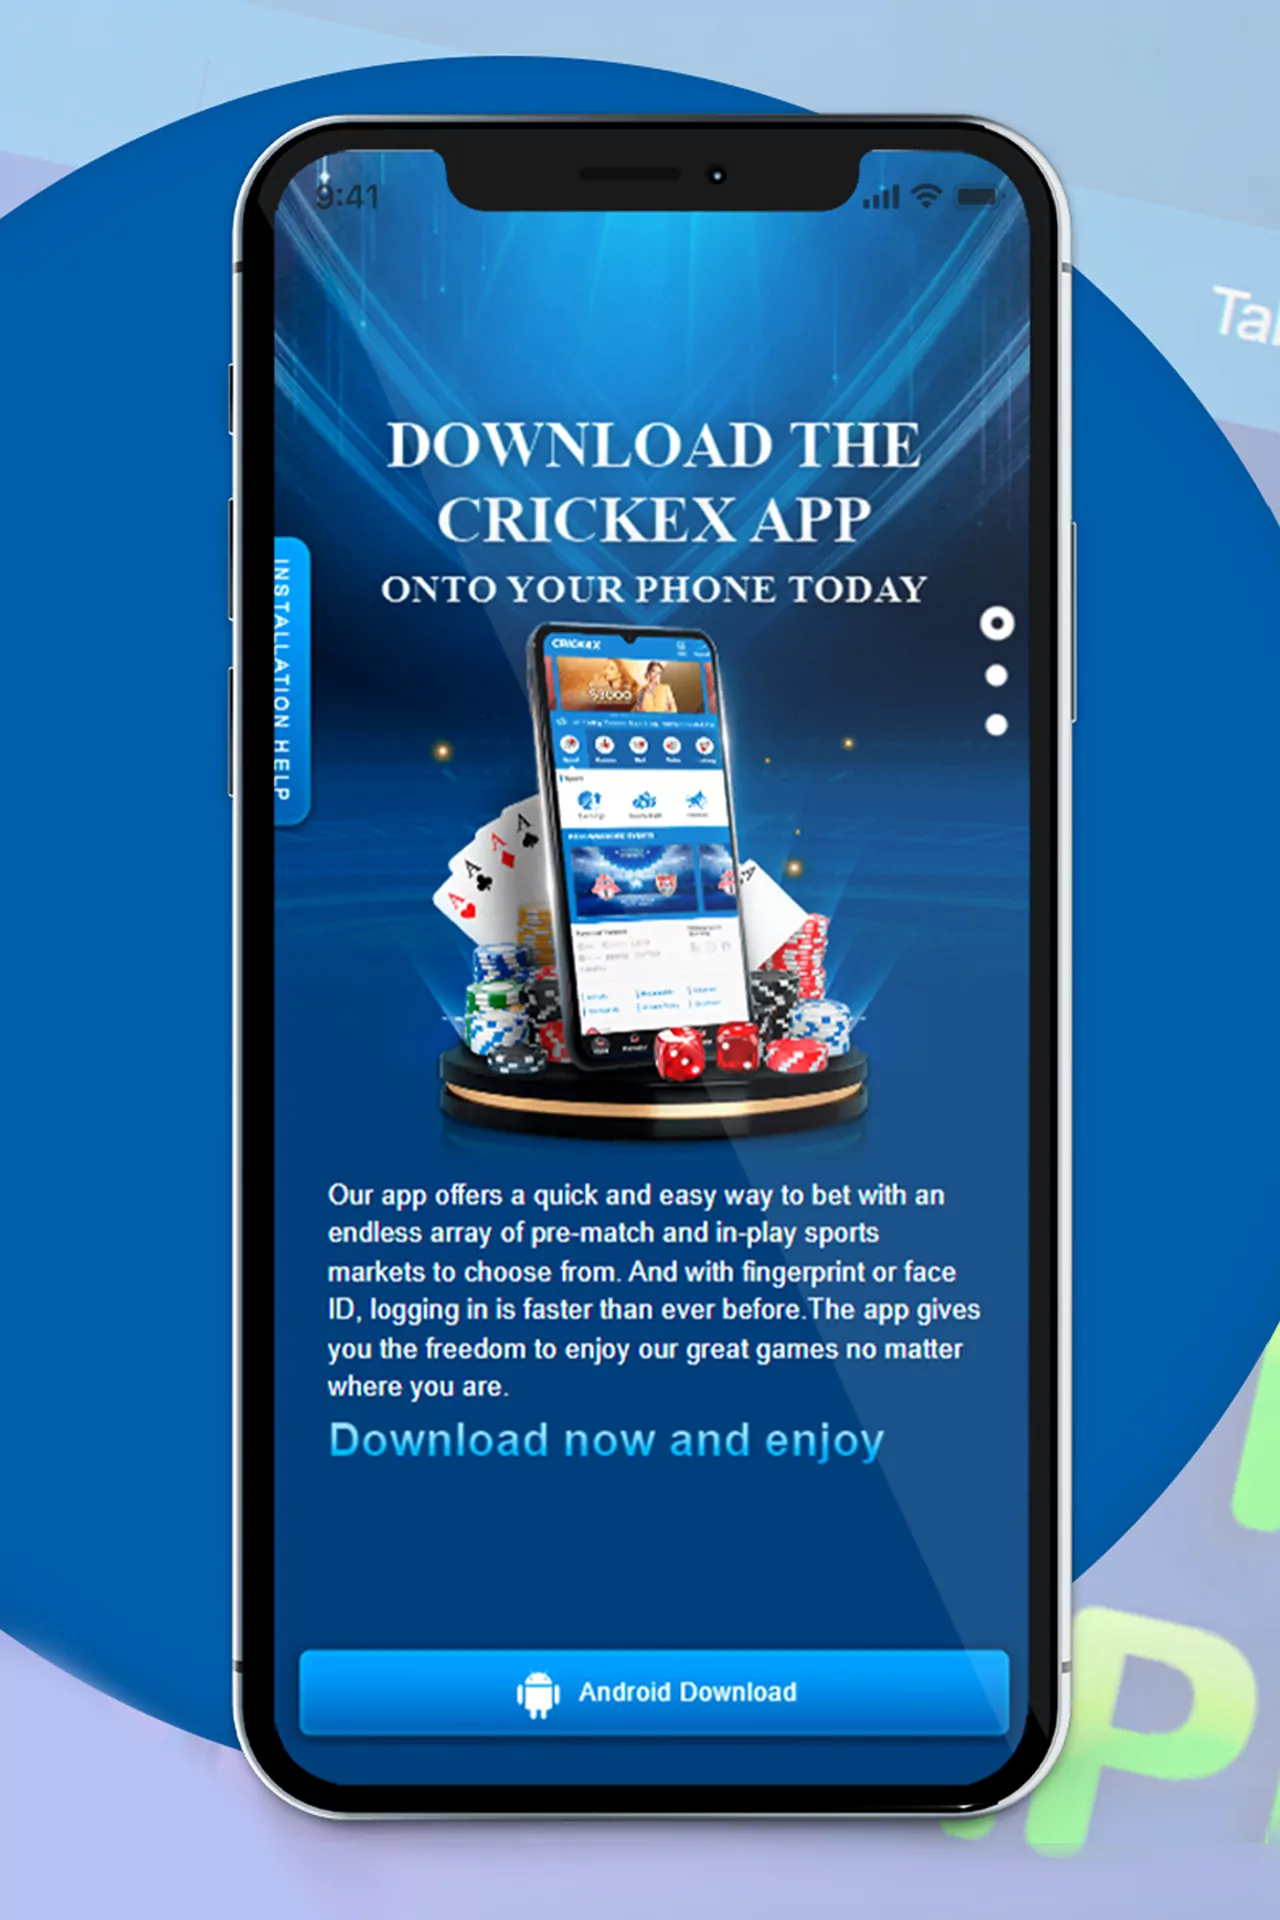 You can download Crickex application only from the official website.